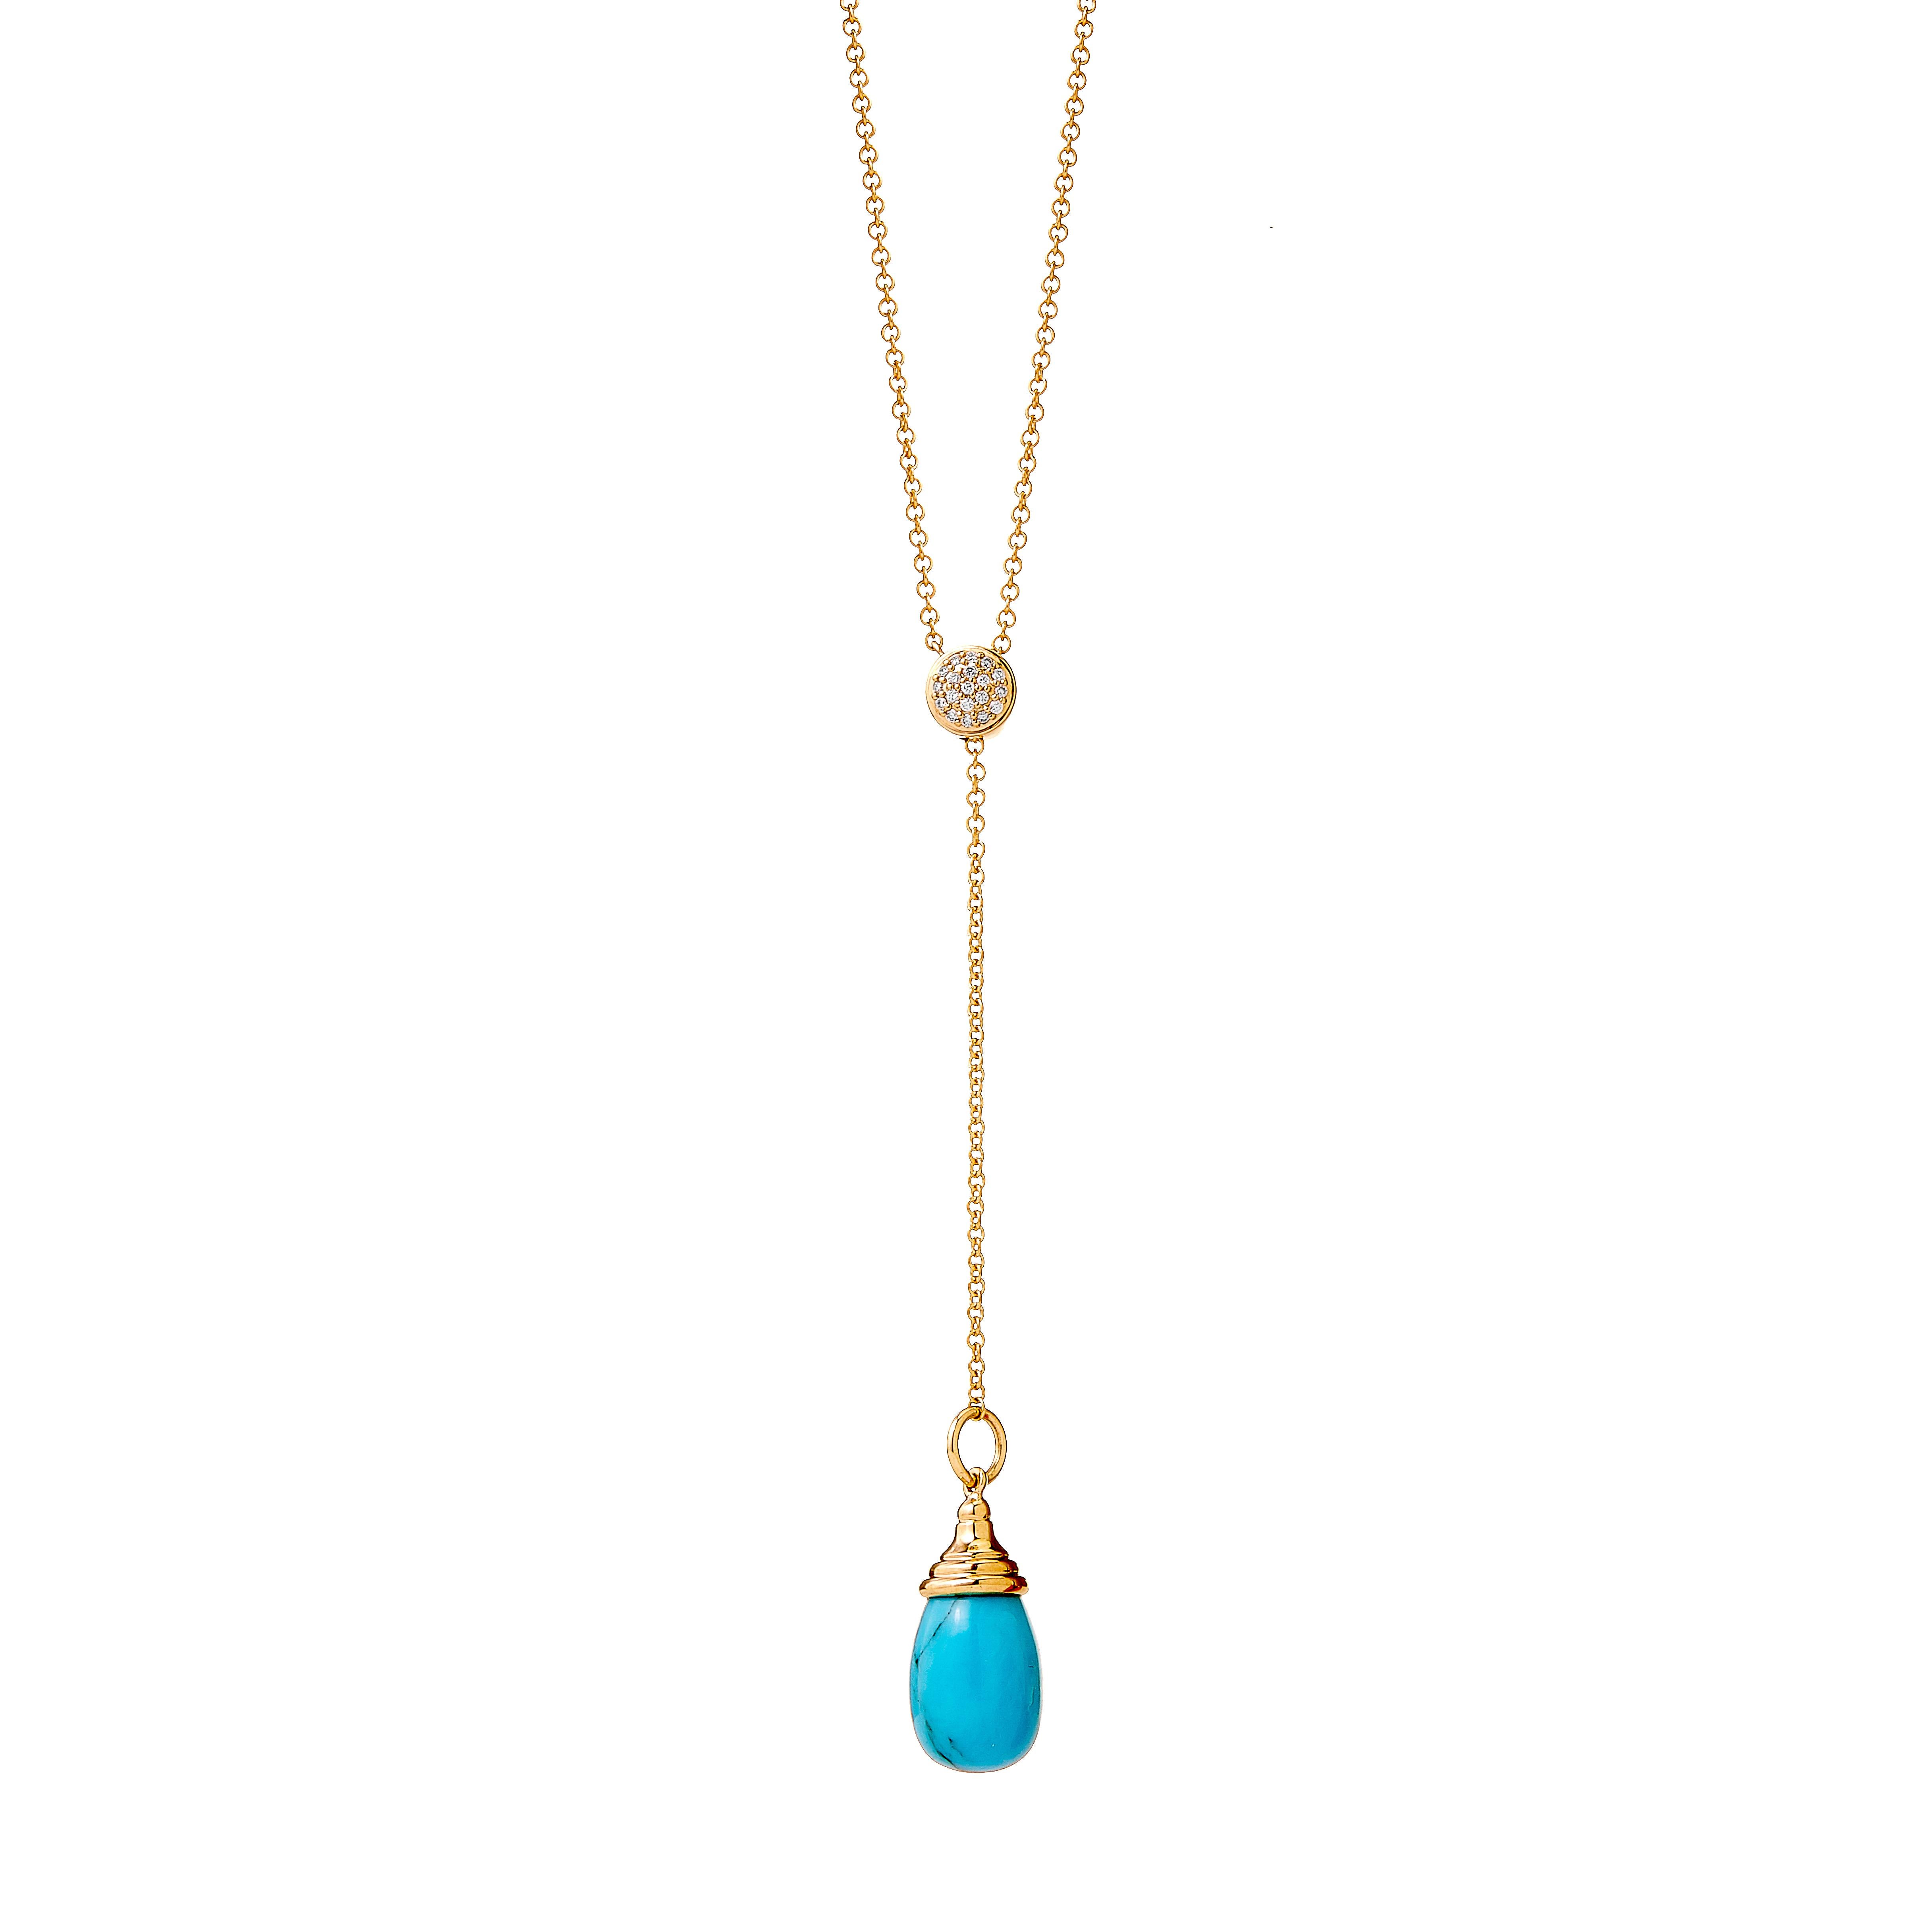 Contemporary Syna Yellow Gold Sleeping Beauty Turquoise Necklace with Champagne Diamonds